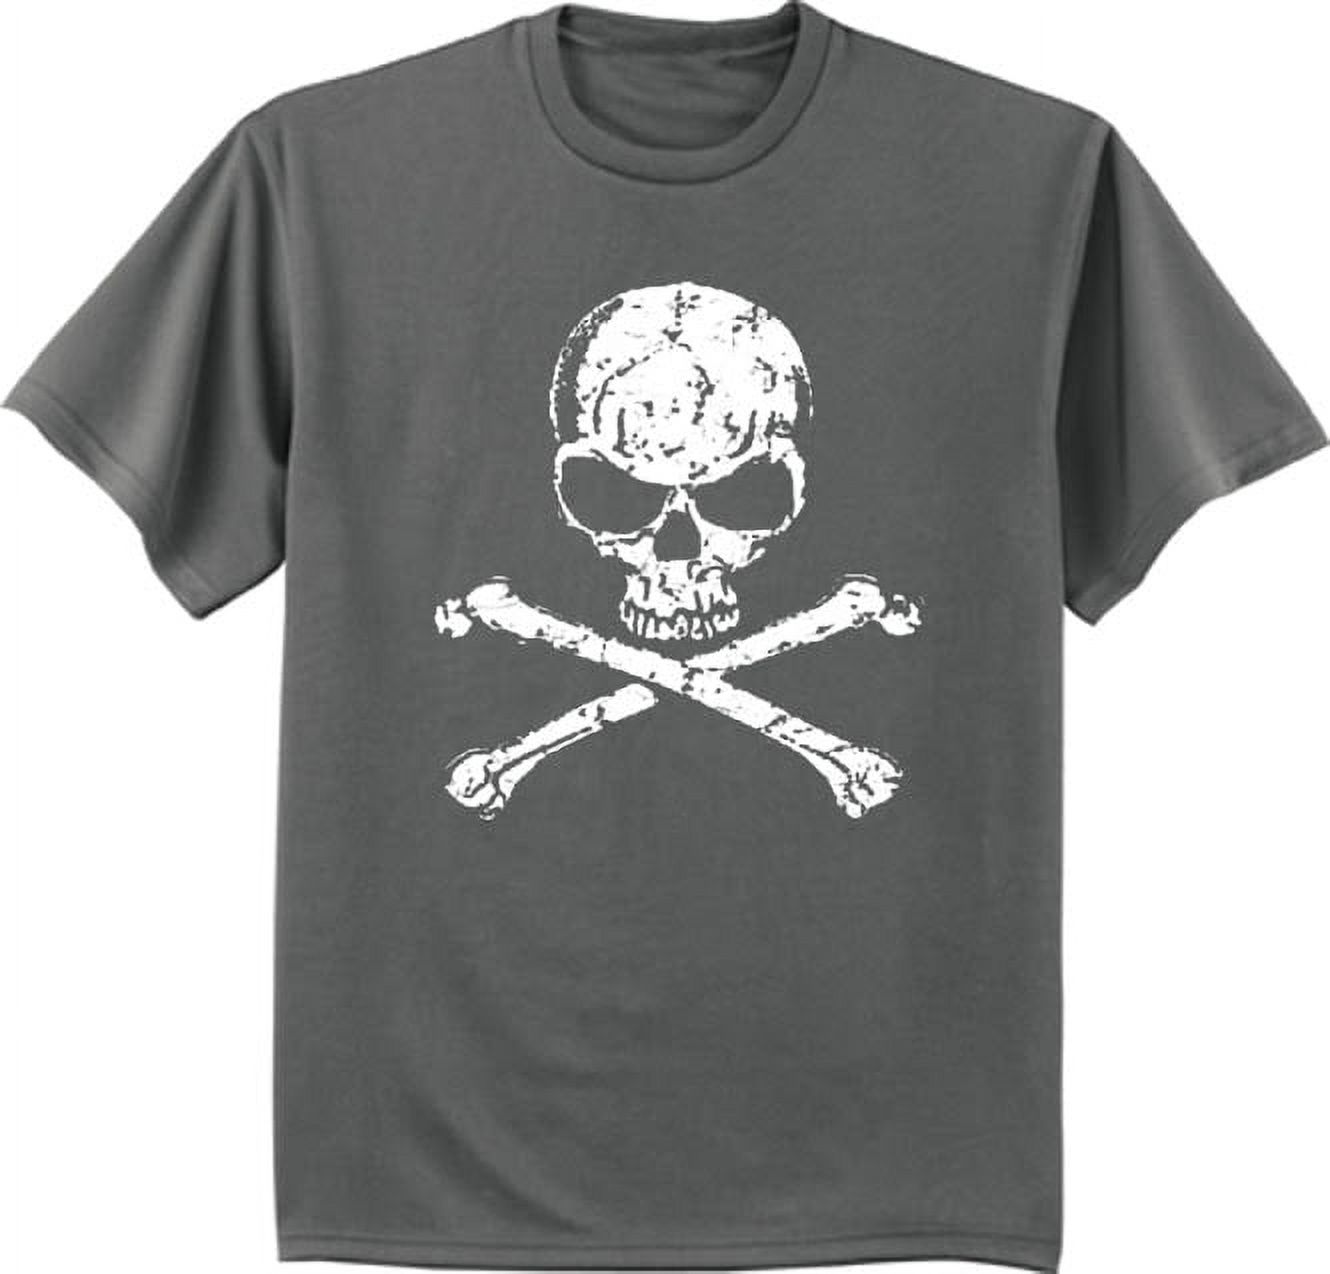 skull and crossbones pirate t-shirt graphic tee for men - image 1 of 1